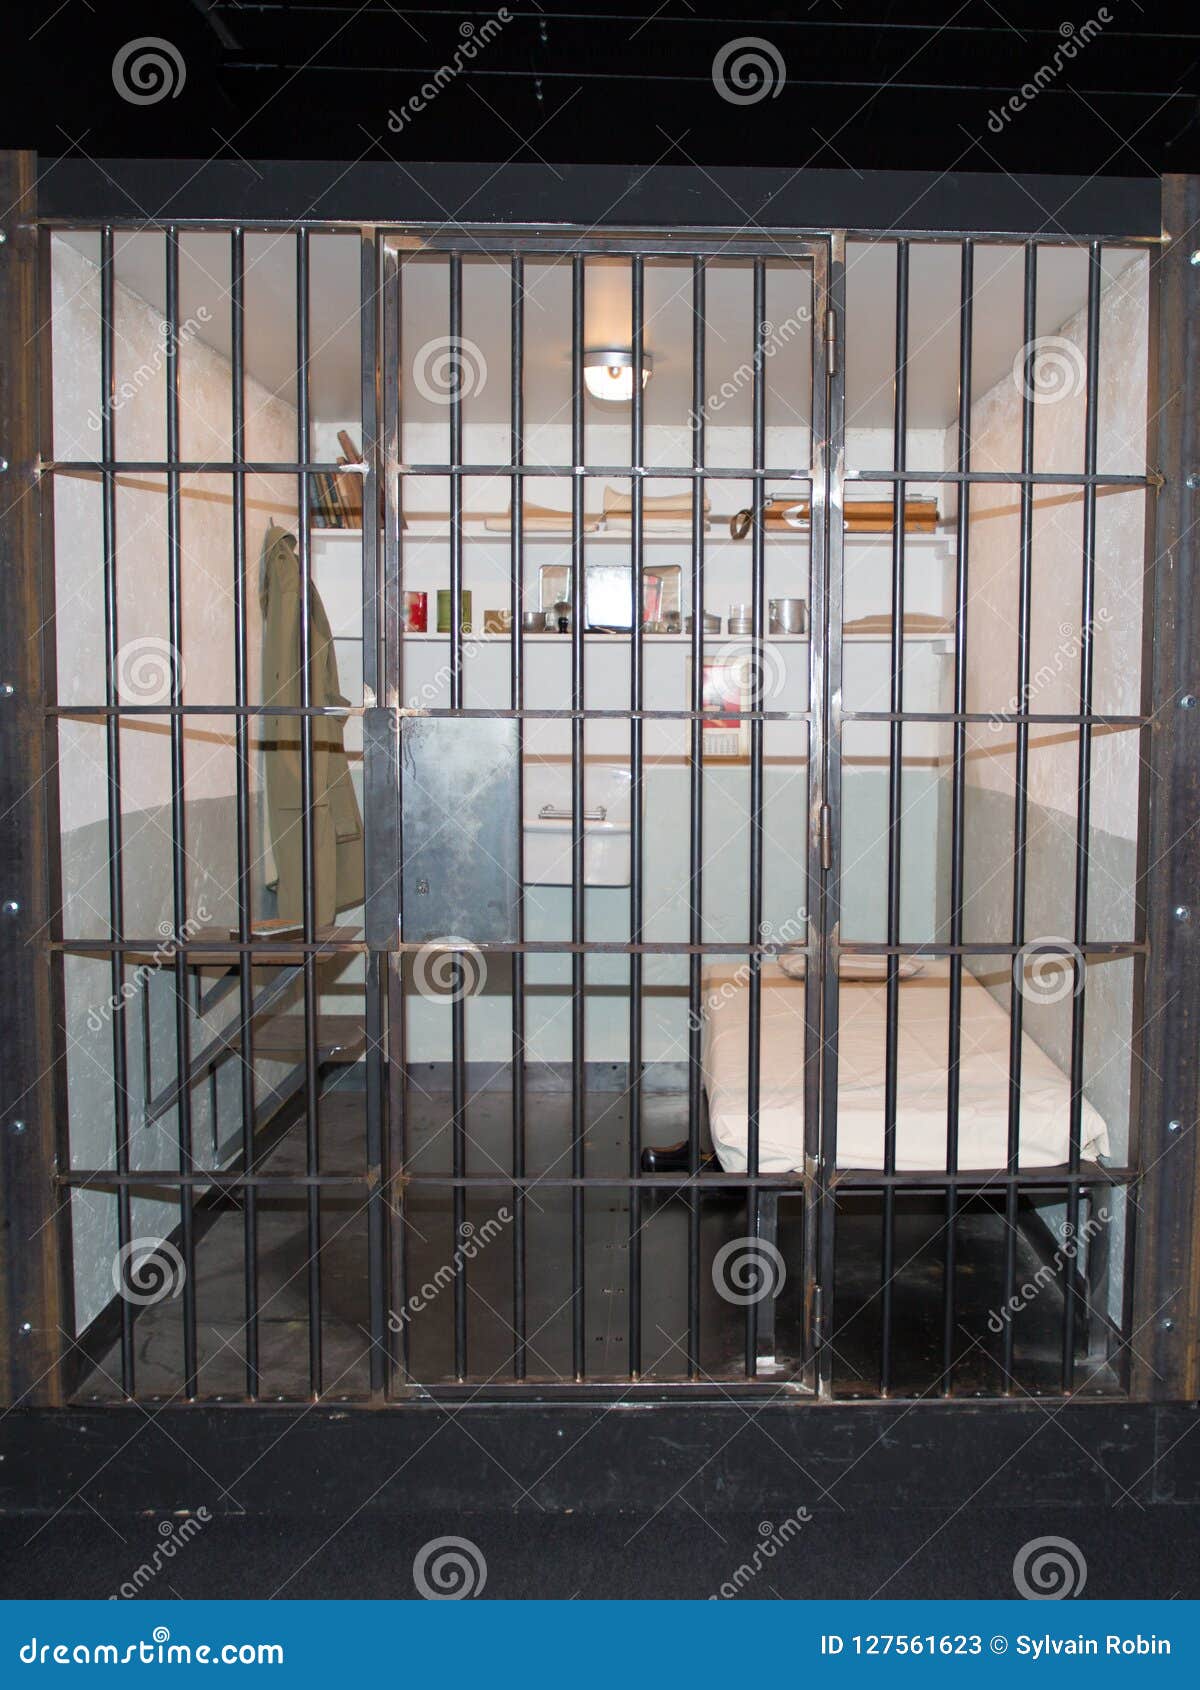 Collection 93+ Images Pictures Of Jail Cell Bars Excellent